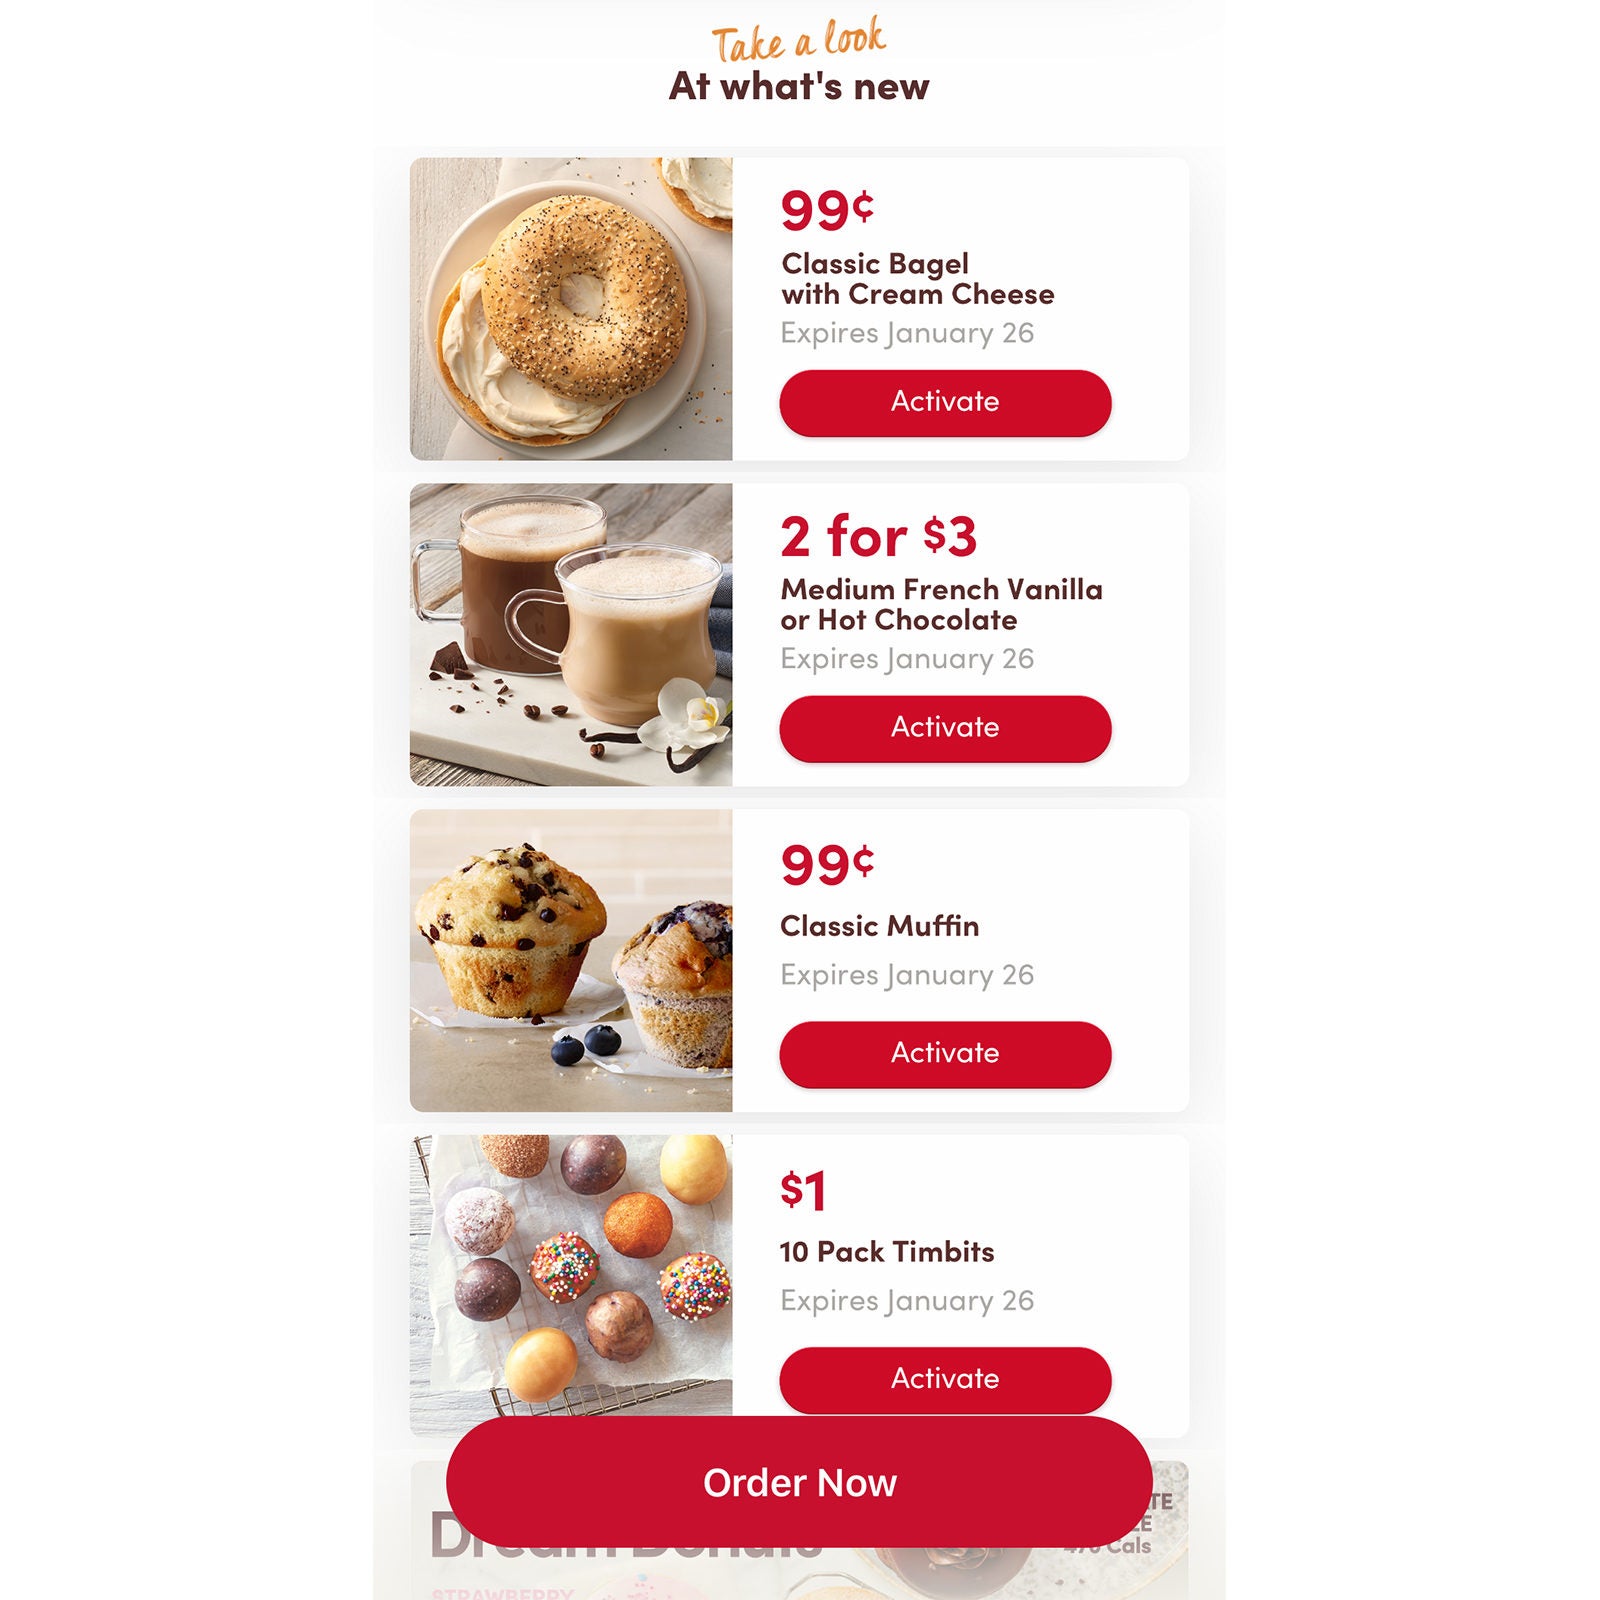 Tim Hortons' Mobile App Now Offers New Digital Coupons ...